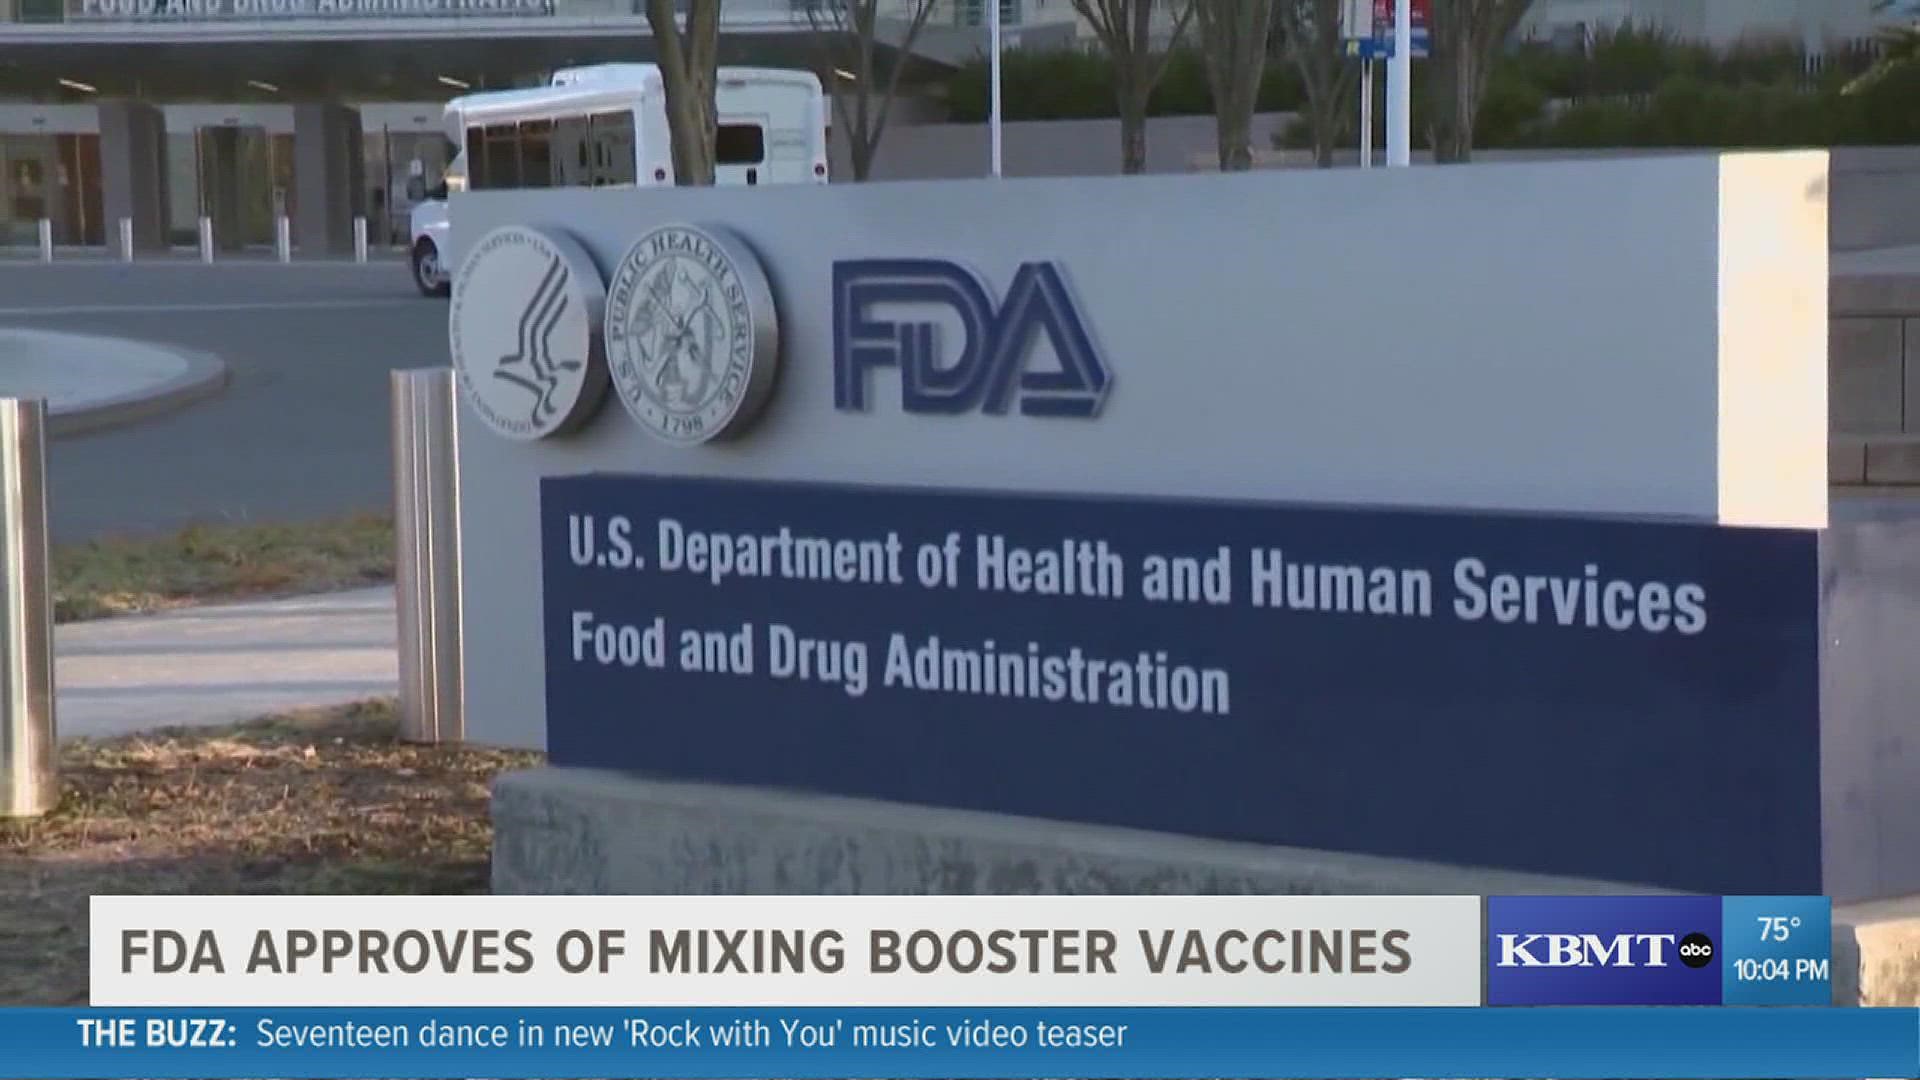 The FDA signed off on a plan that allows people to use different vaccine brands for booster shots.